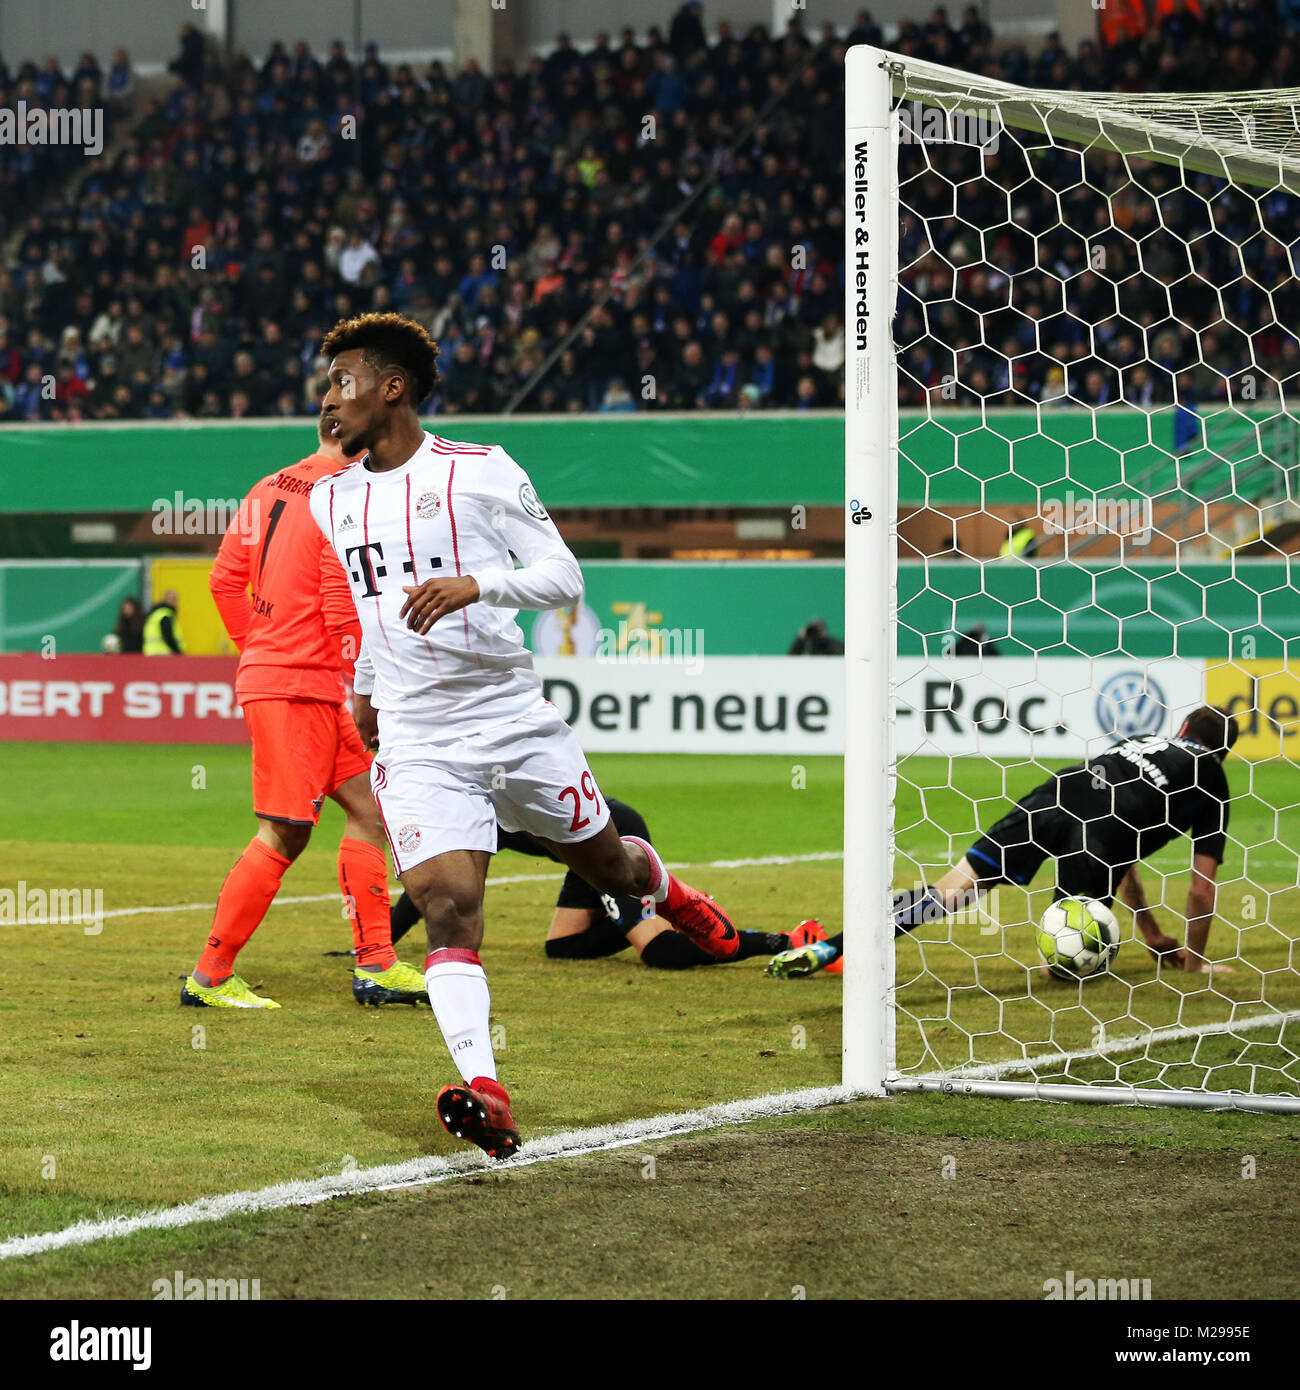 (180207) -- PADERBORN, Feb. 7, 2018(Xinhua) -- Kingsley Coman (Front) of Bayern Munich scores during the quarterfinal match of German Cup between SC Paderborn and Bayern Munich at Benteler Arena in Paderborn, Germany, on Feb. 6, 2018. Bayern Munich won 6-0. (Xinhua/Ulrich Hufnagel) Stock Photo